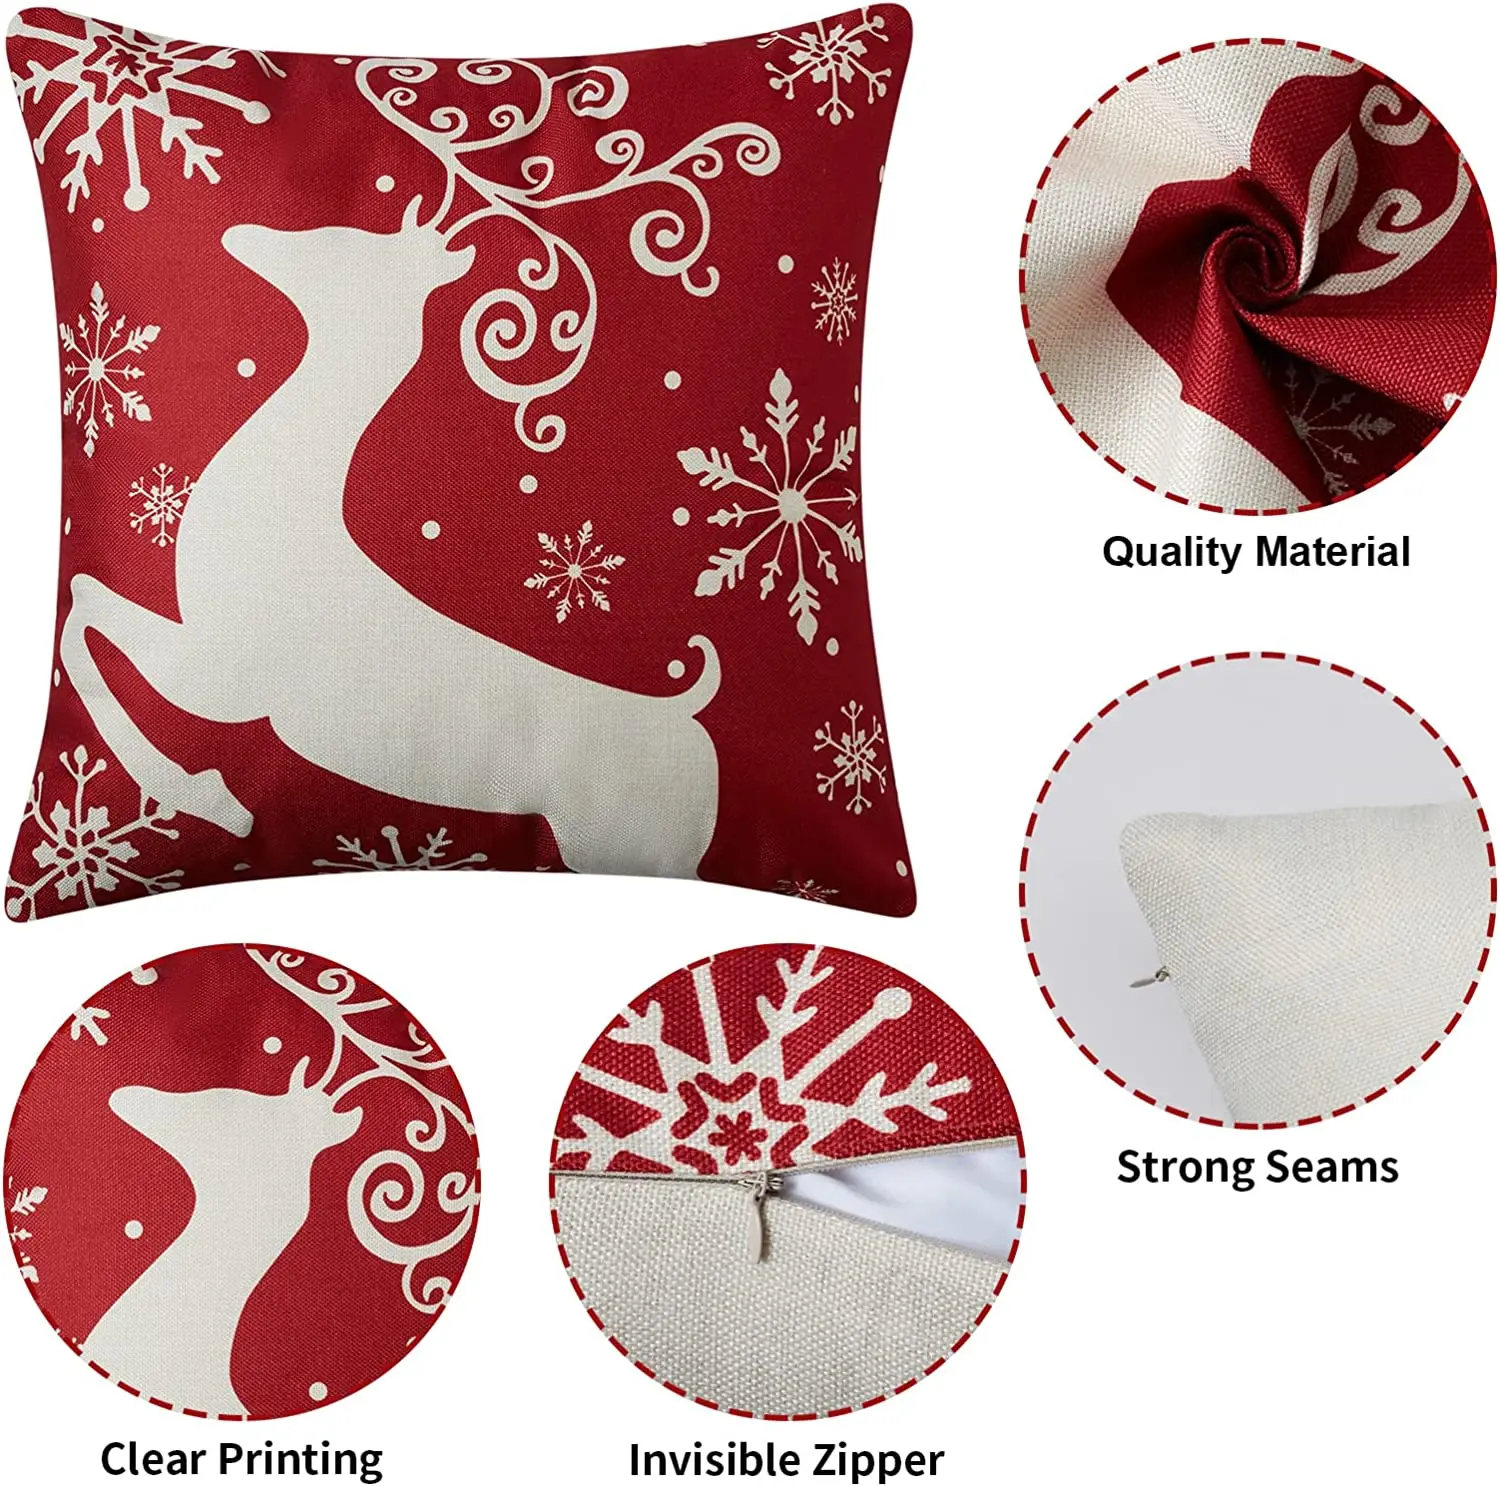 https://ae01.alicdn.com/kf/Sc02a822fdd6b4e52b81e2ef655651c10f/Christmas-Throw-Pillow-Cover-18-x-18-Inch-Christmas-Decorations-Winter-Holiday-Rustic-Farmhouse-Faux-Linen.jpg